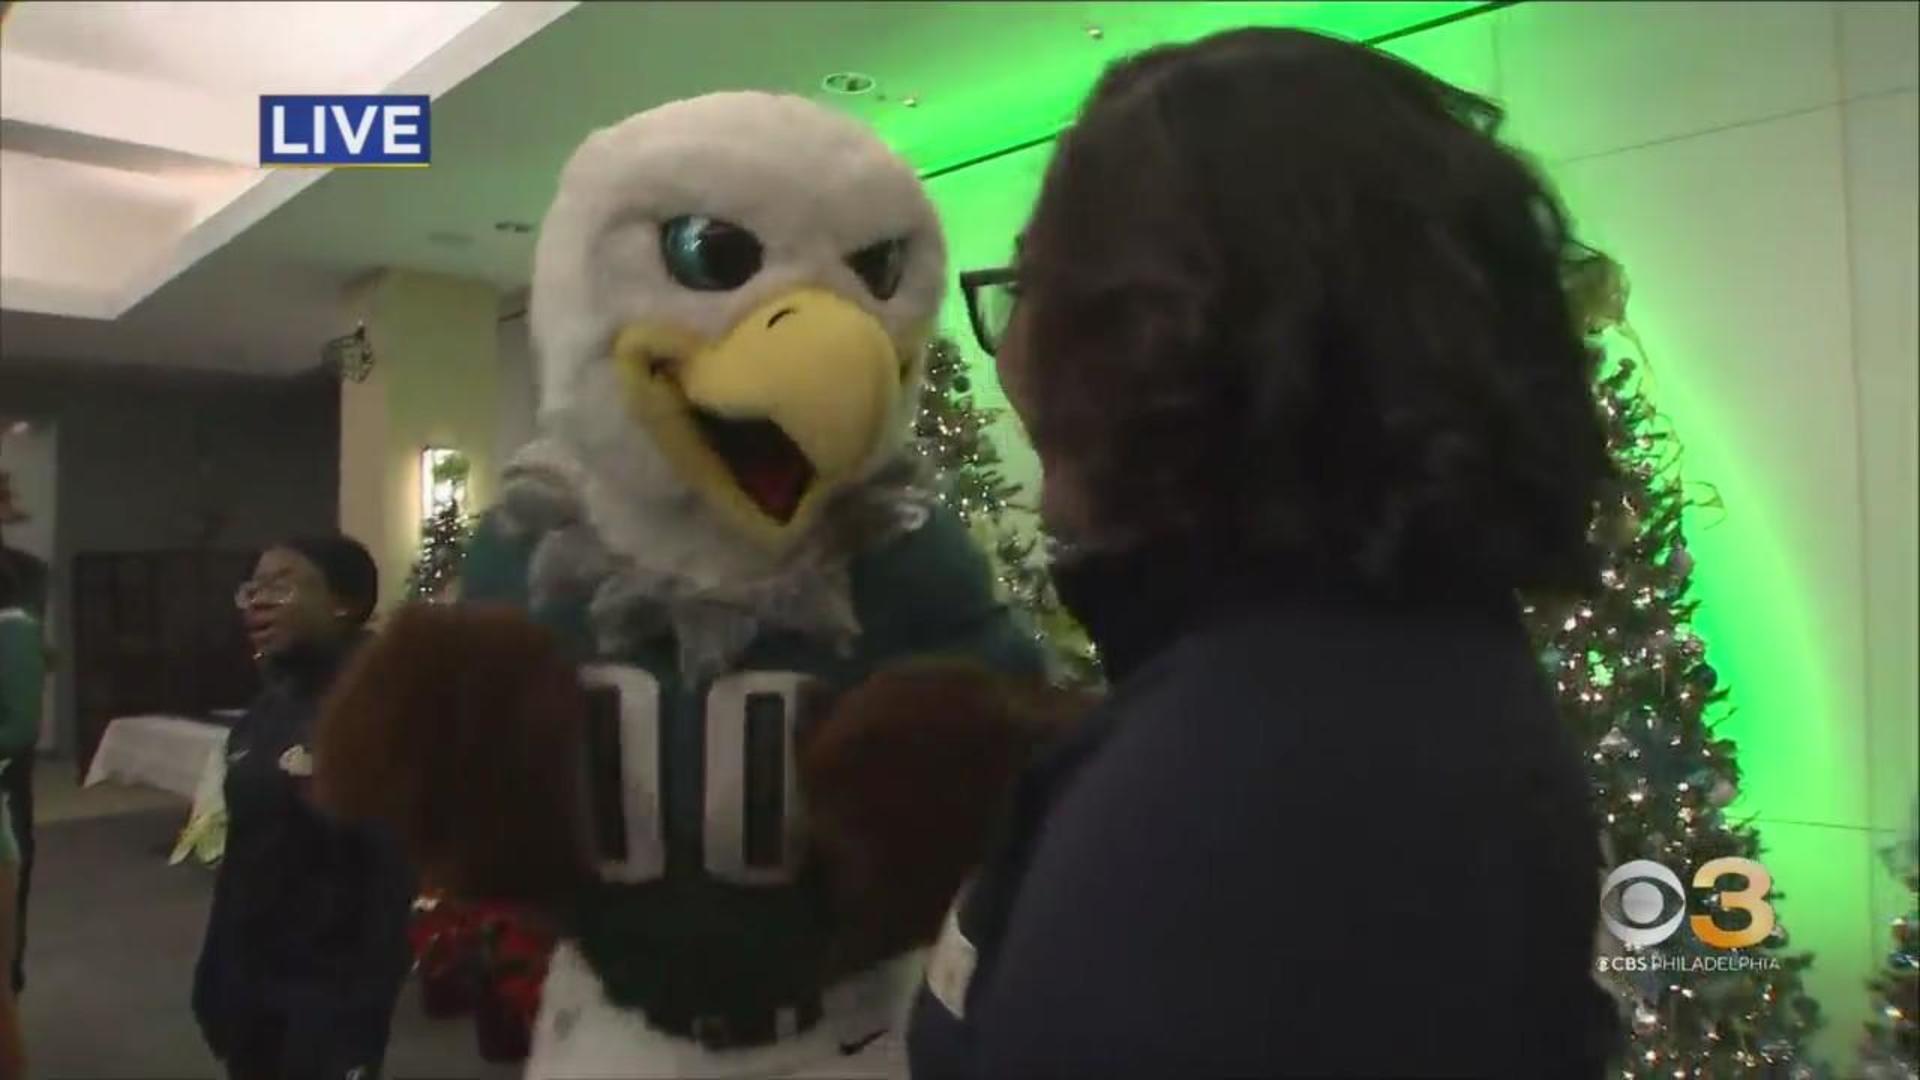 Forget Mariah Carey: Eagles linemen prepare second Christmas album with  Patti LaBelle